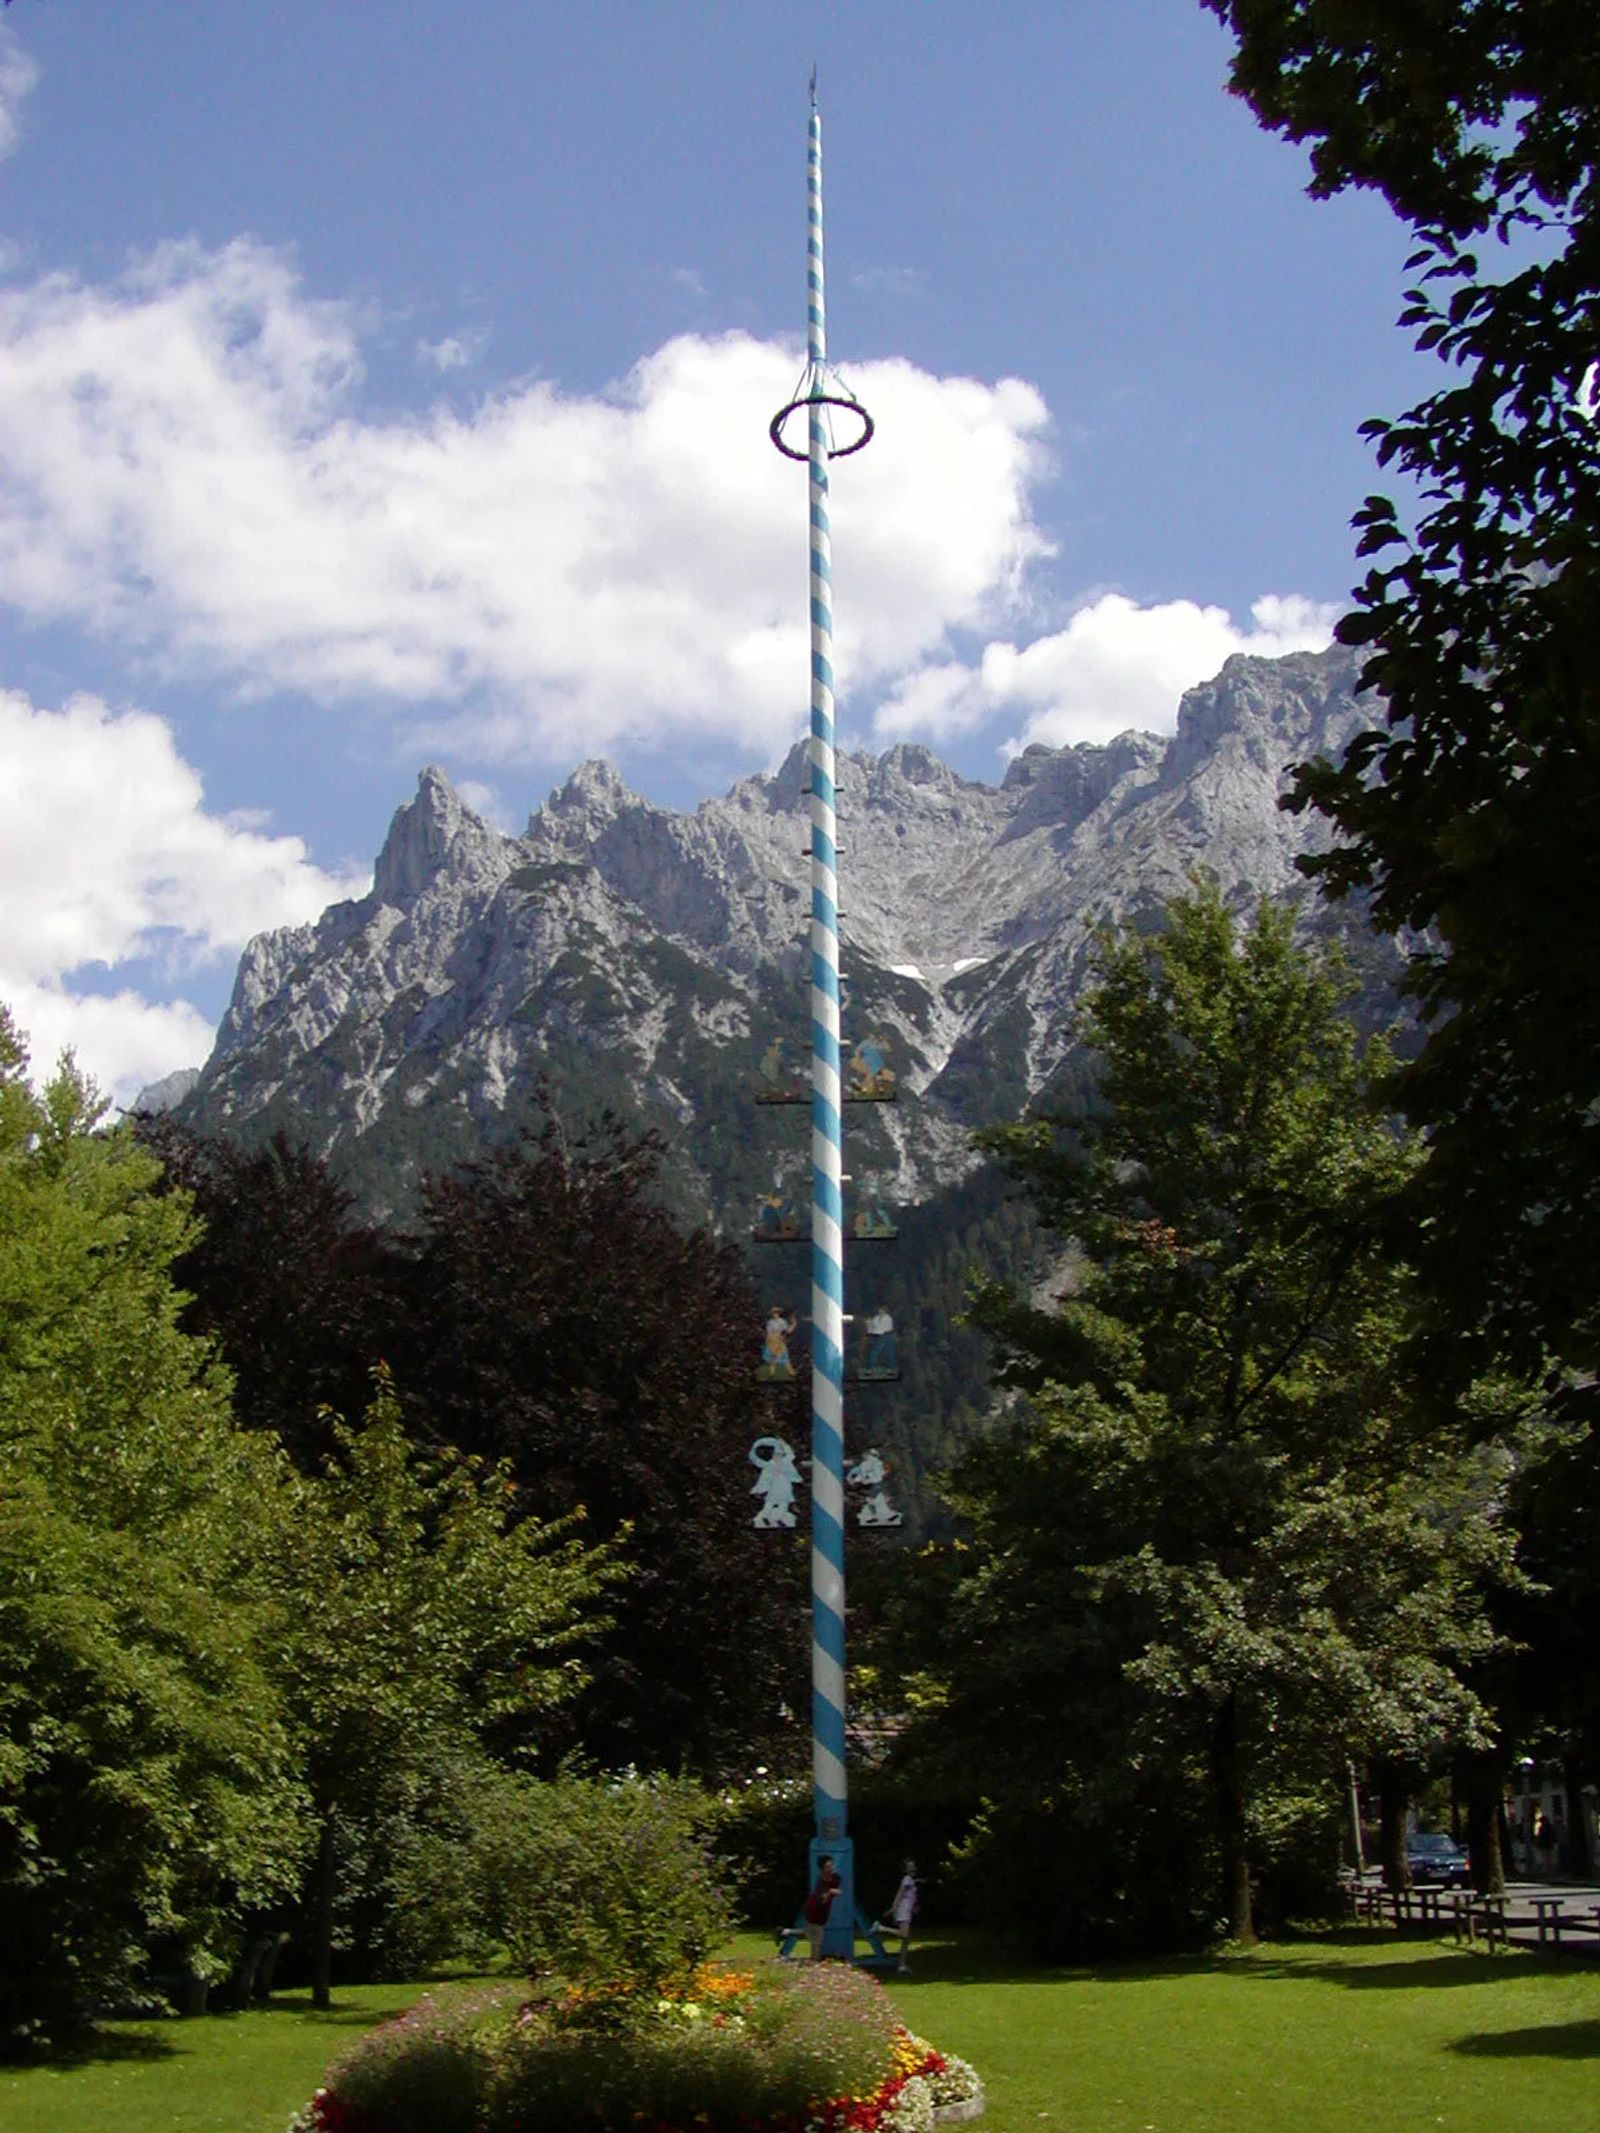 Photo of the Maypole in Mittenwald, Germany